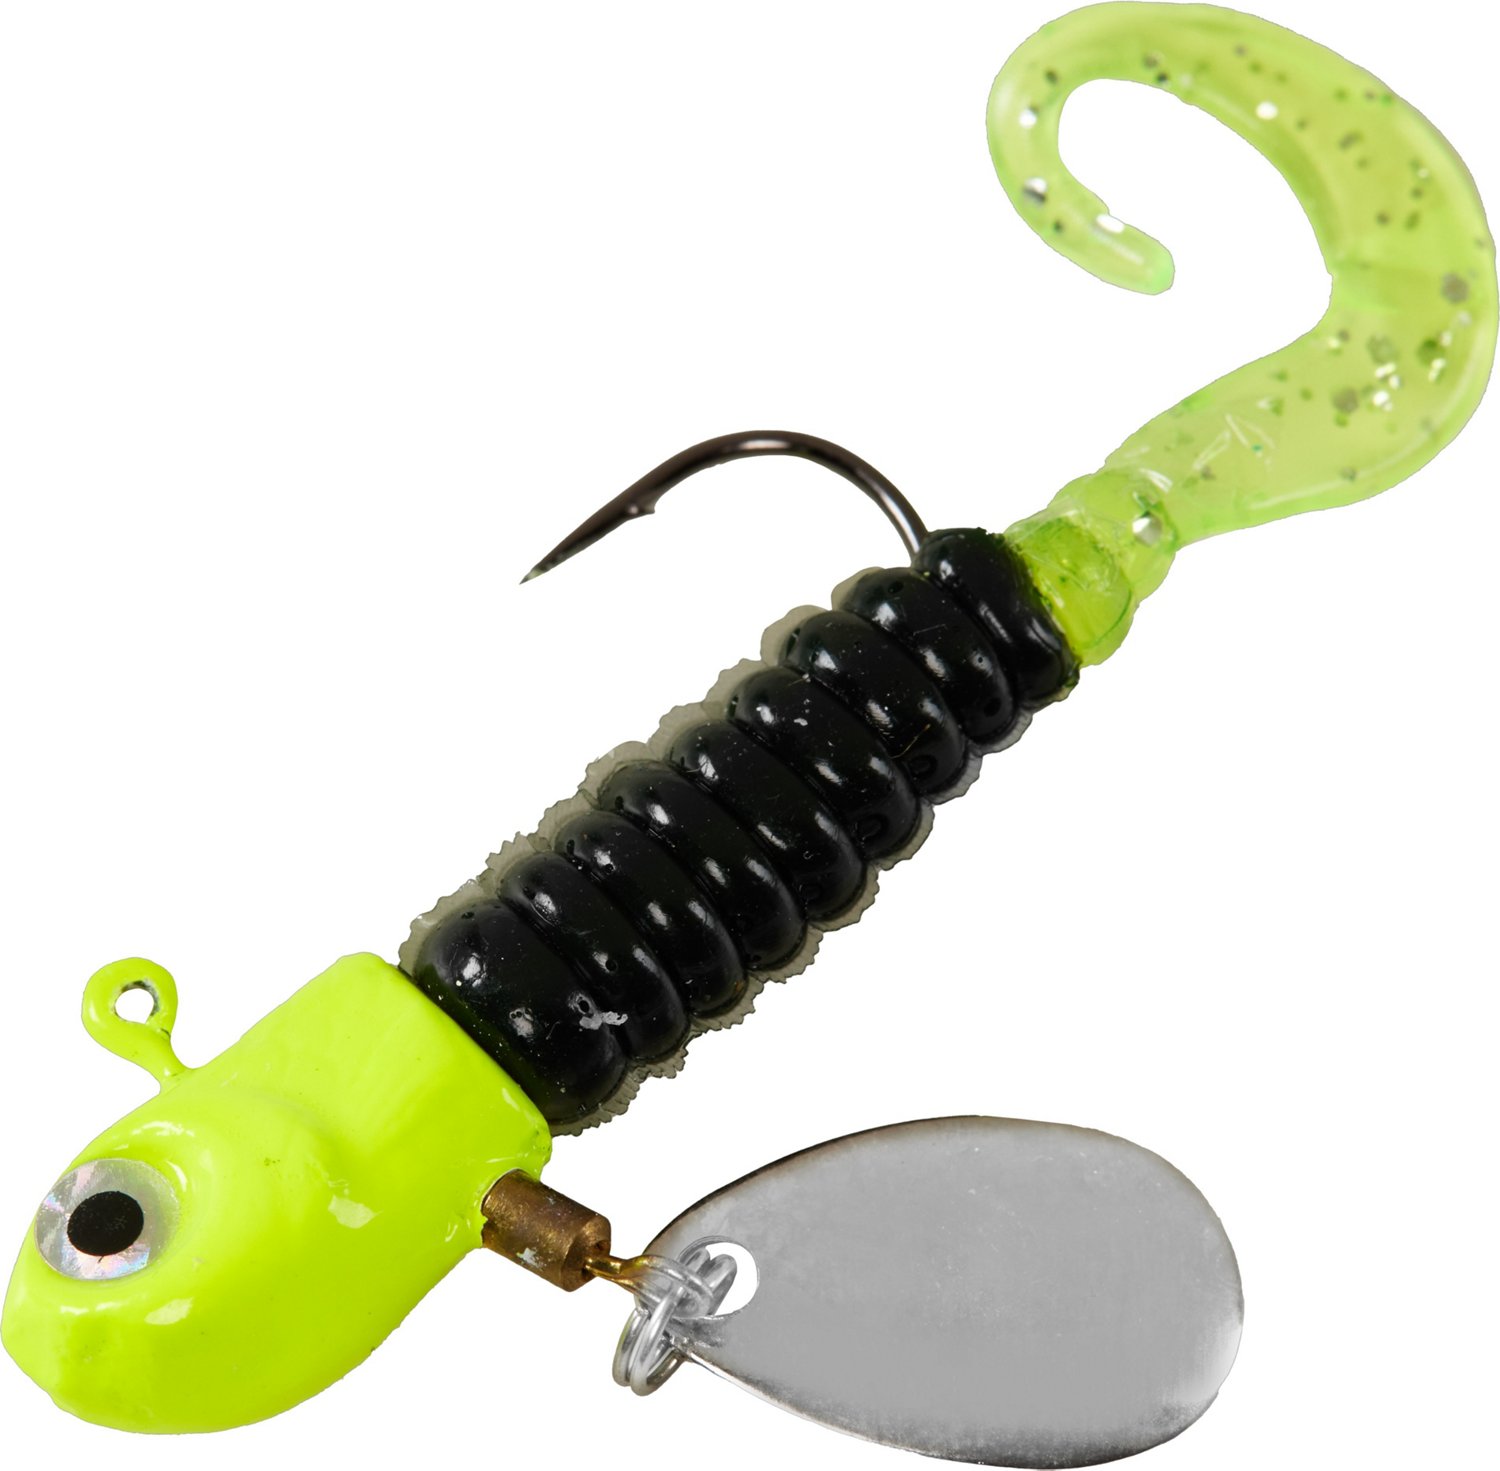 H2OX Curl Tail Spin Jigs 3 Pack